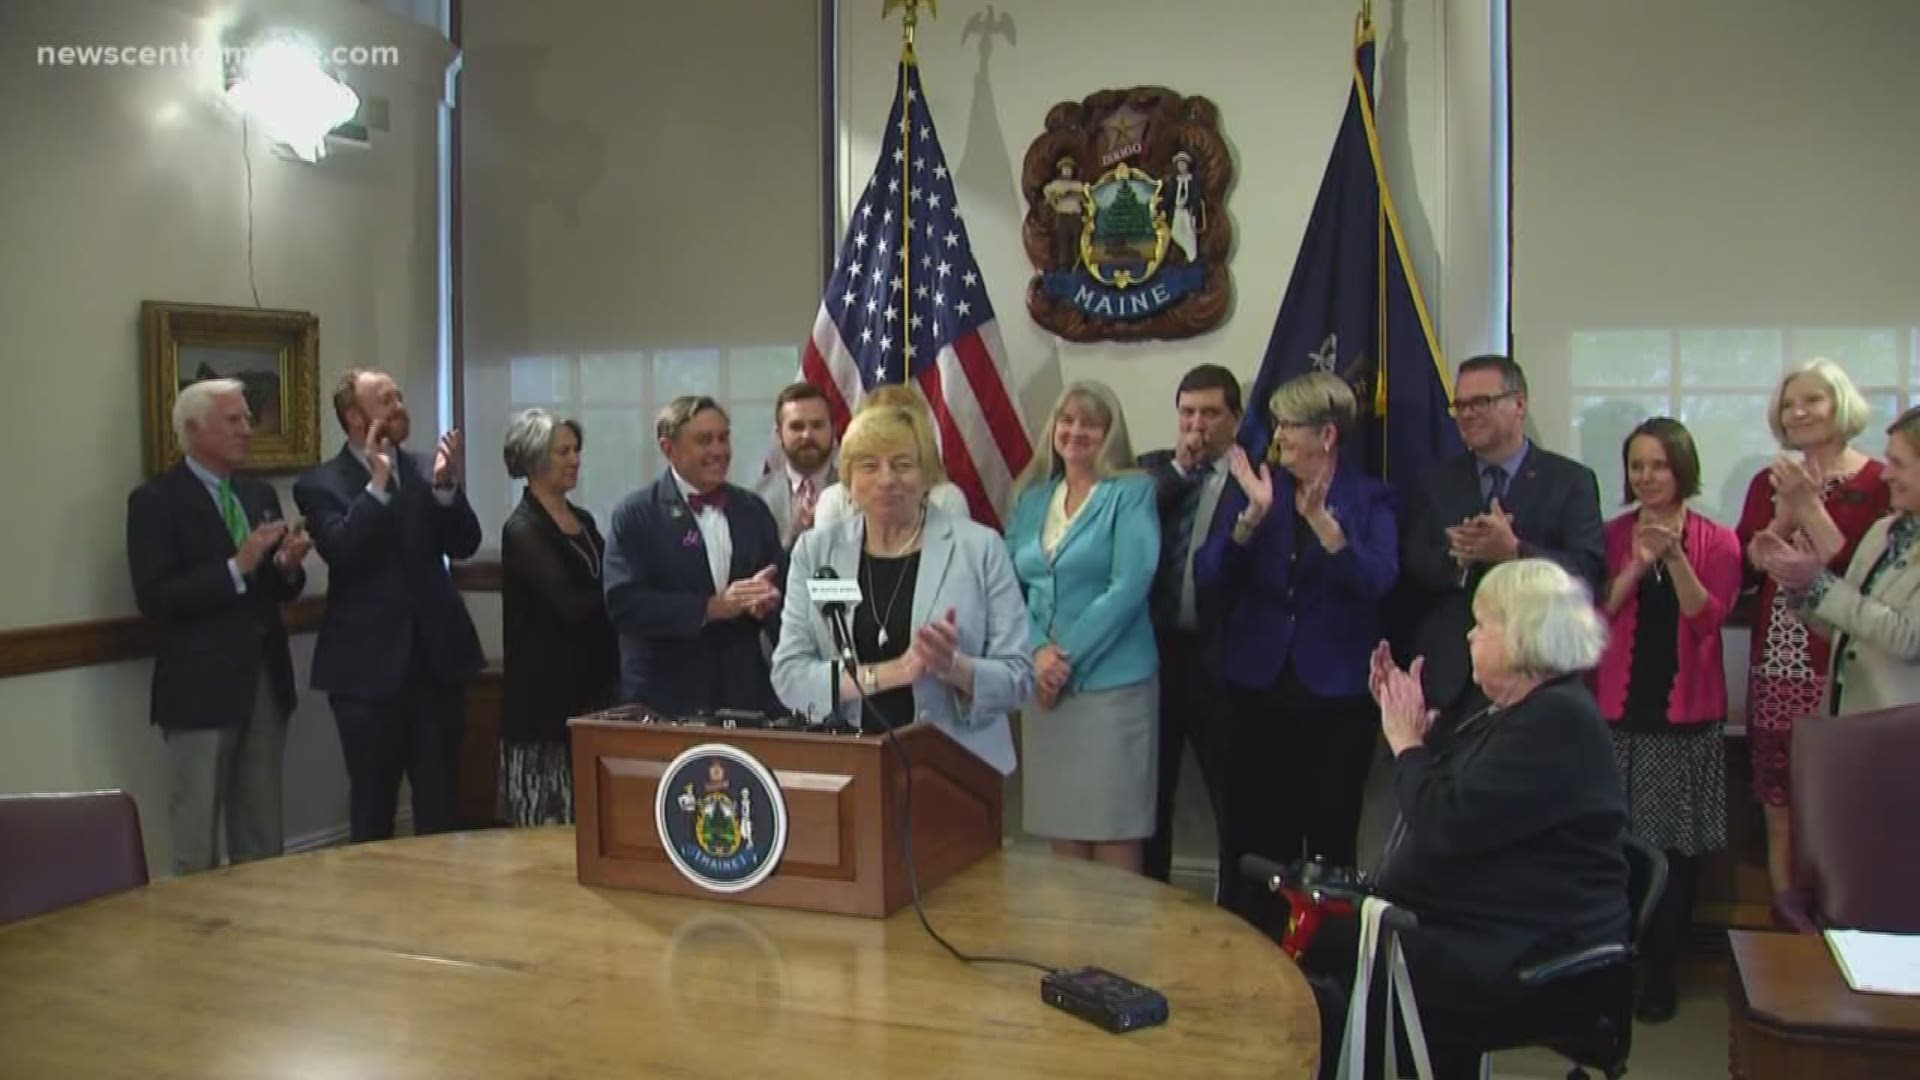 The new bill will cover 85 percent of Maine's workers, according to Gov. Janet Mills' office.